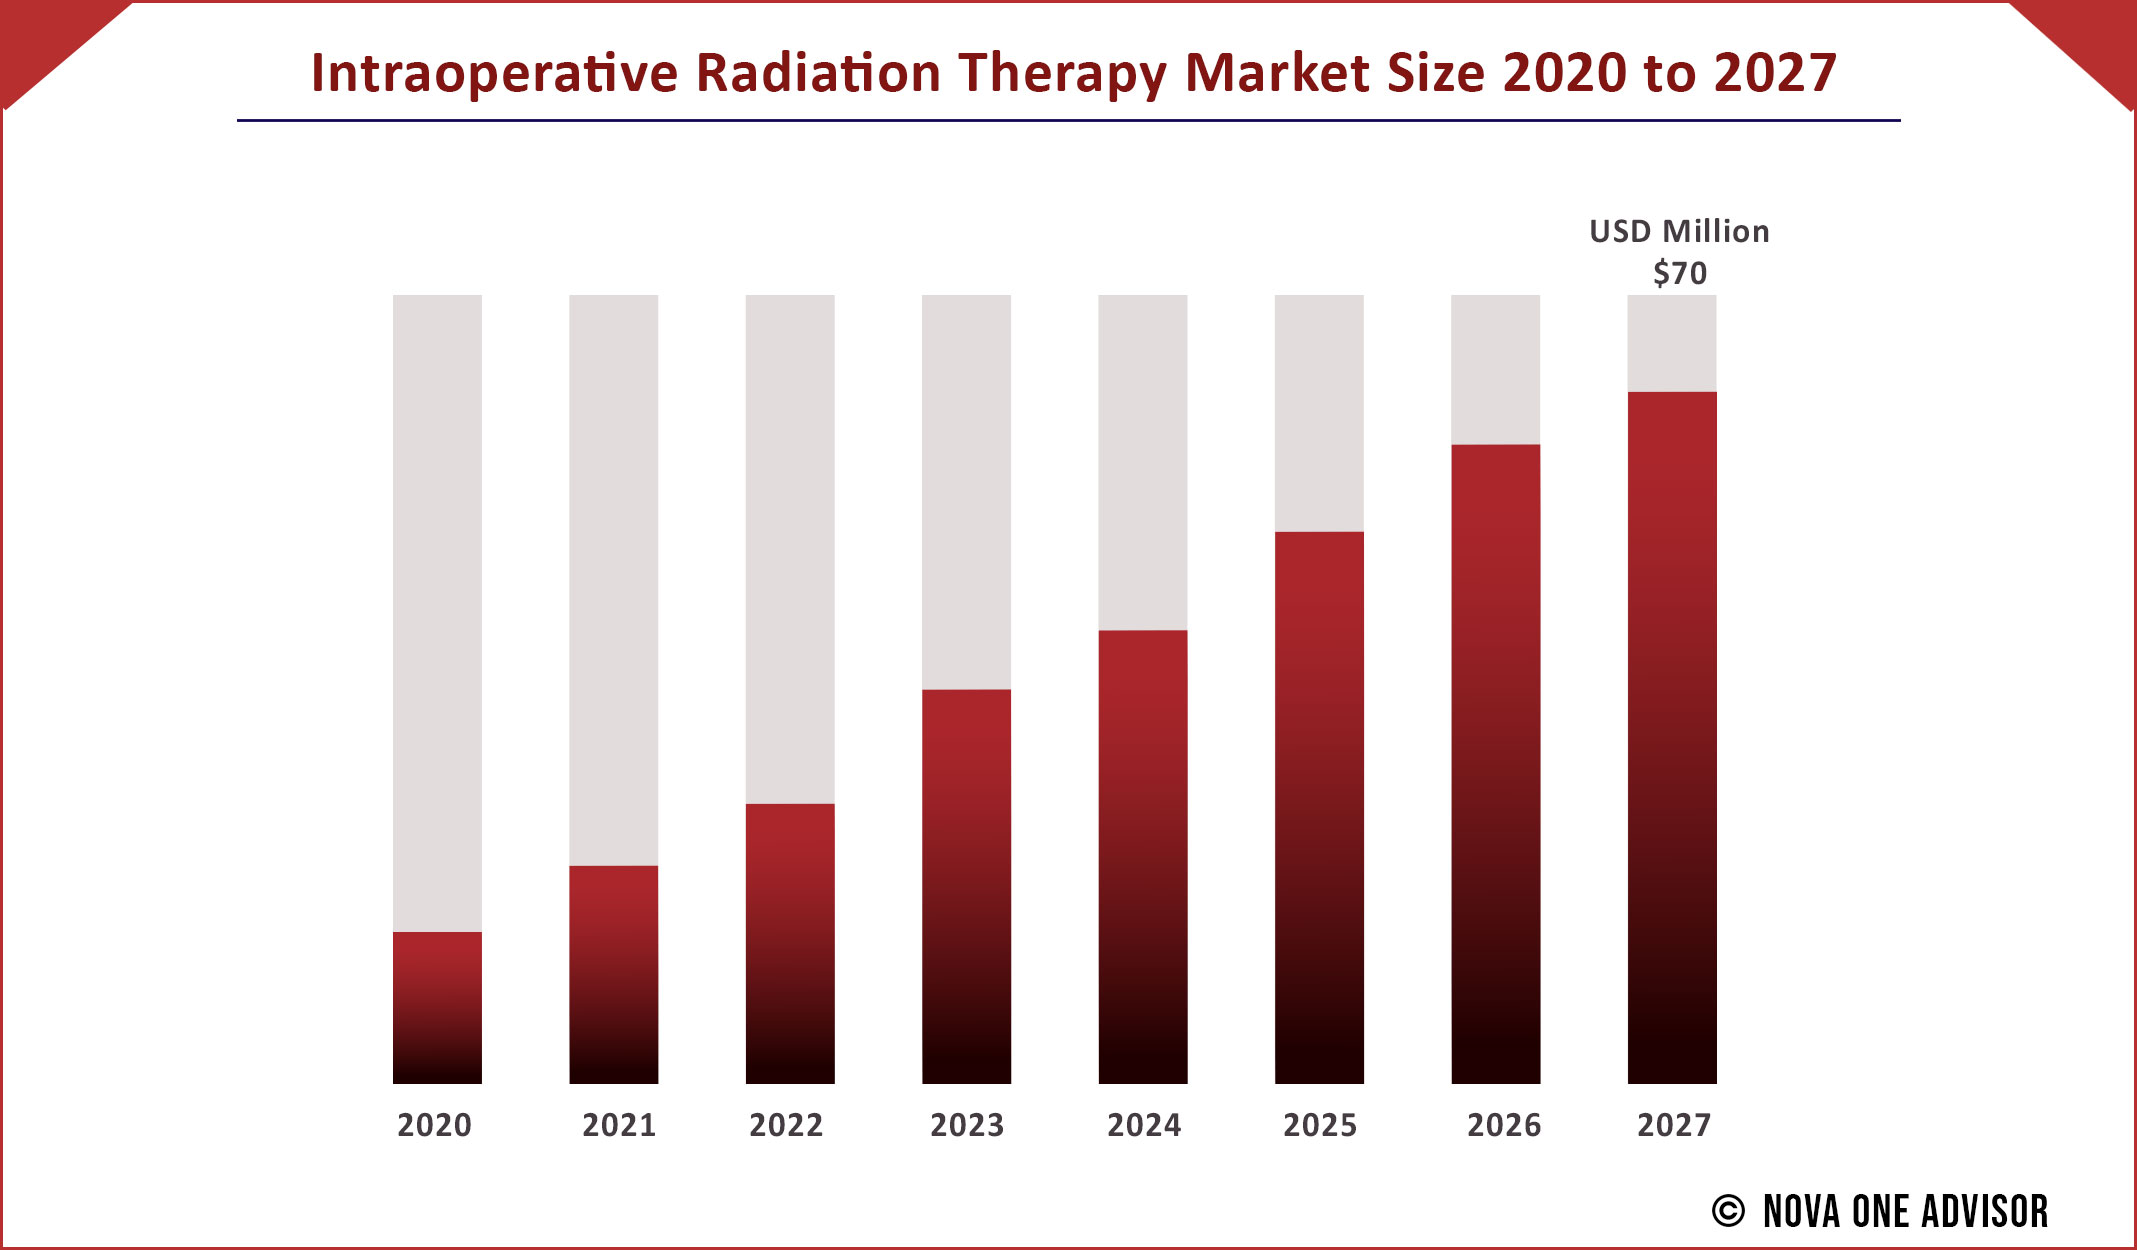 Intraoperative Radiation Therapy Market Size 2020 to 2027